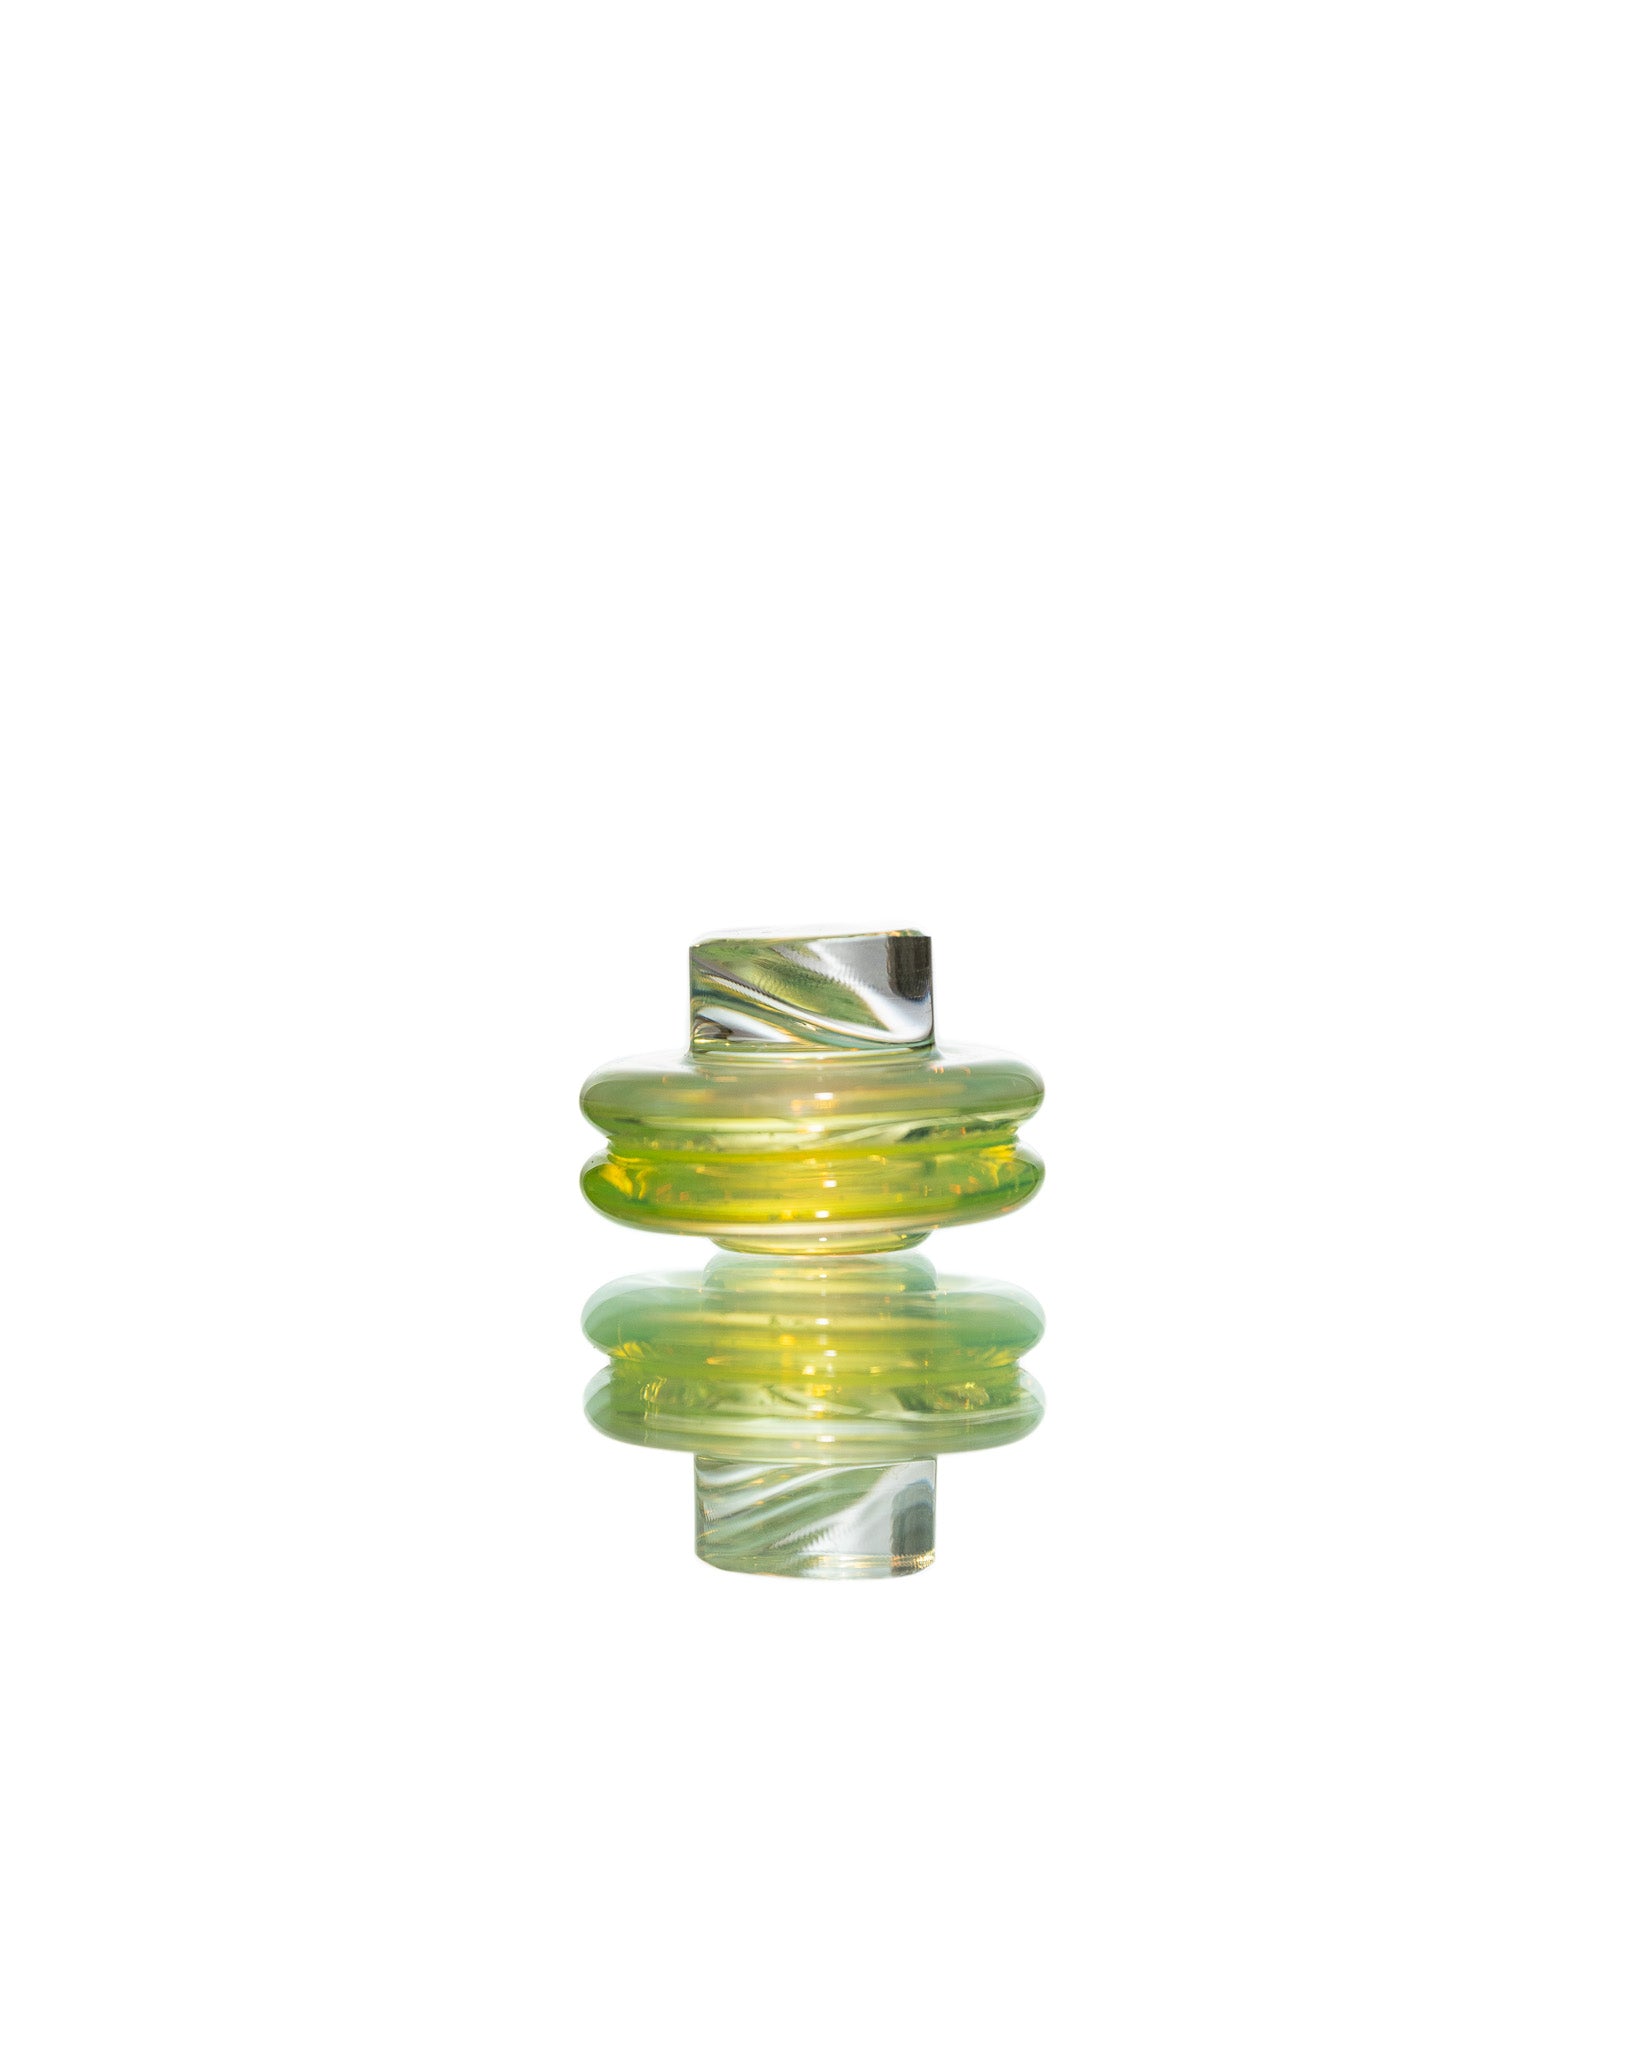 One Trick Pony - "Green Slyme" Flat Top "Rockulus" Spinner Cap